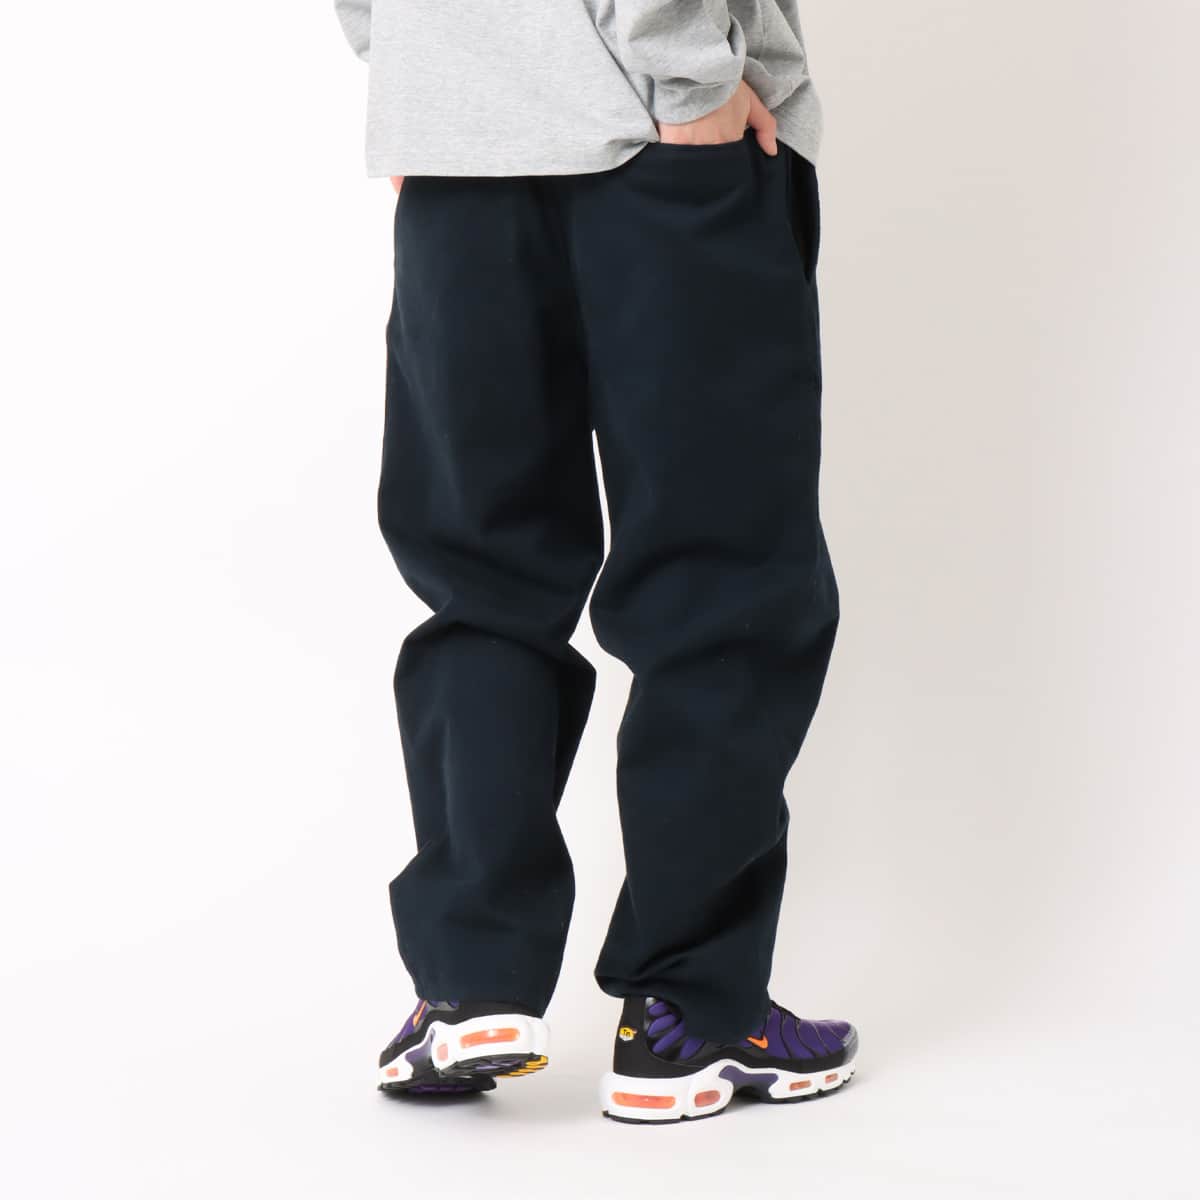 atmos Baggy Tapered Chino Pants NAVY